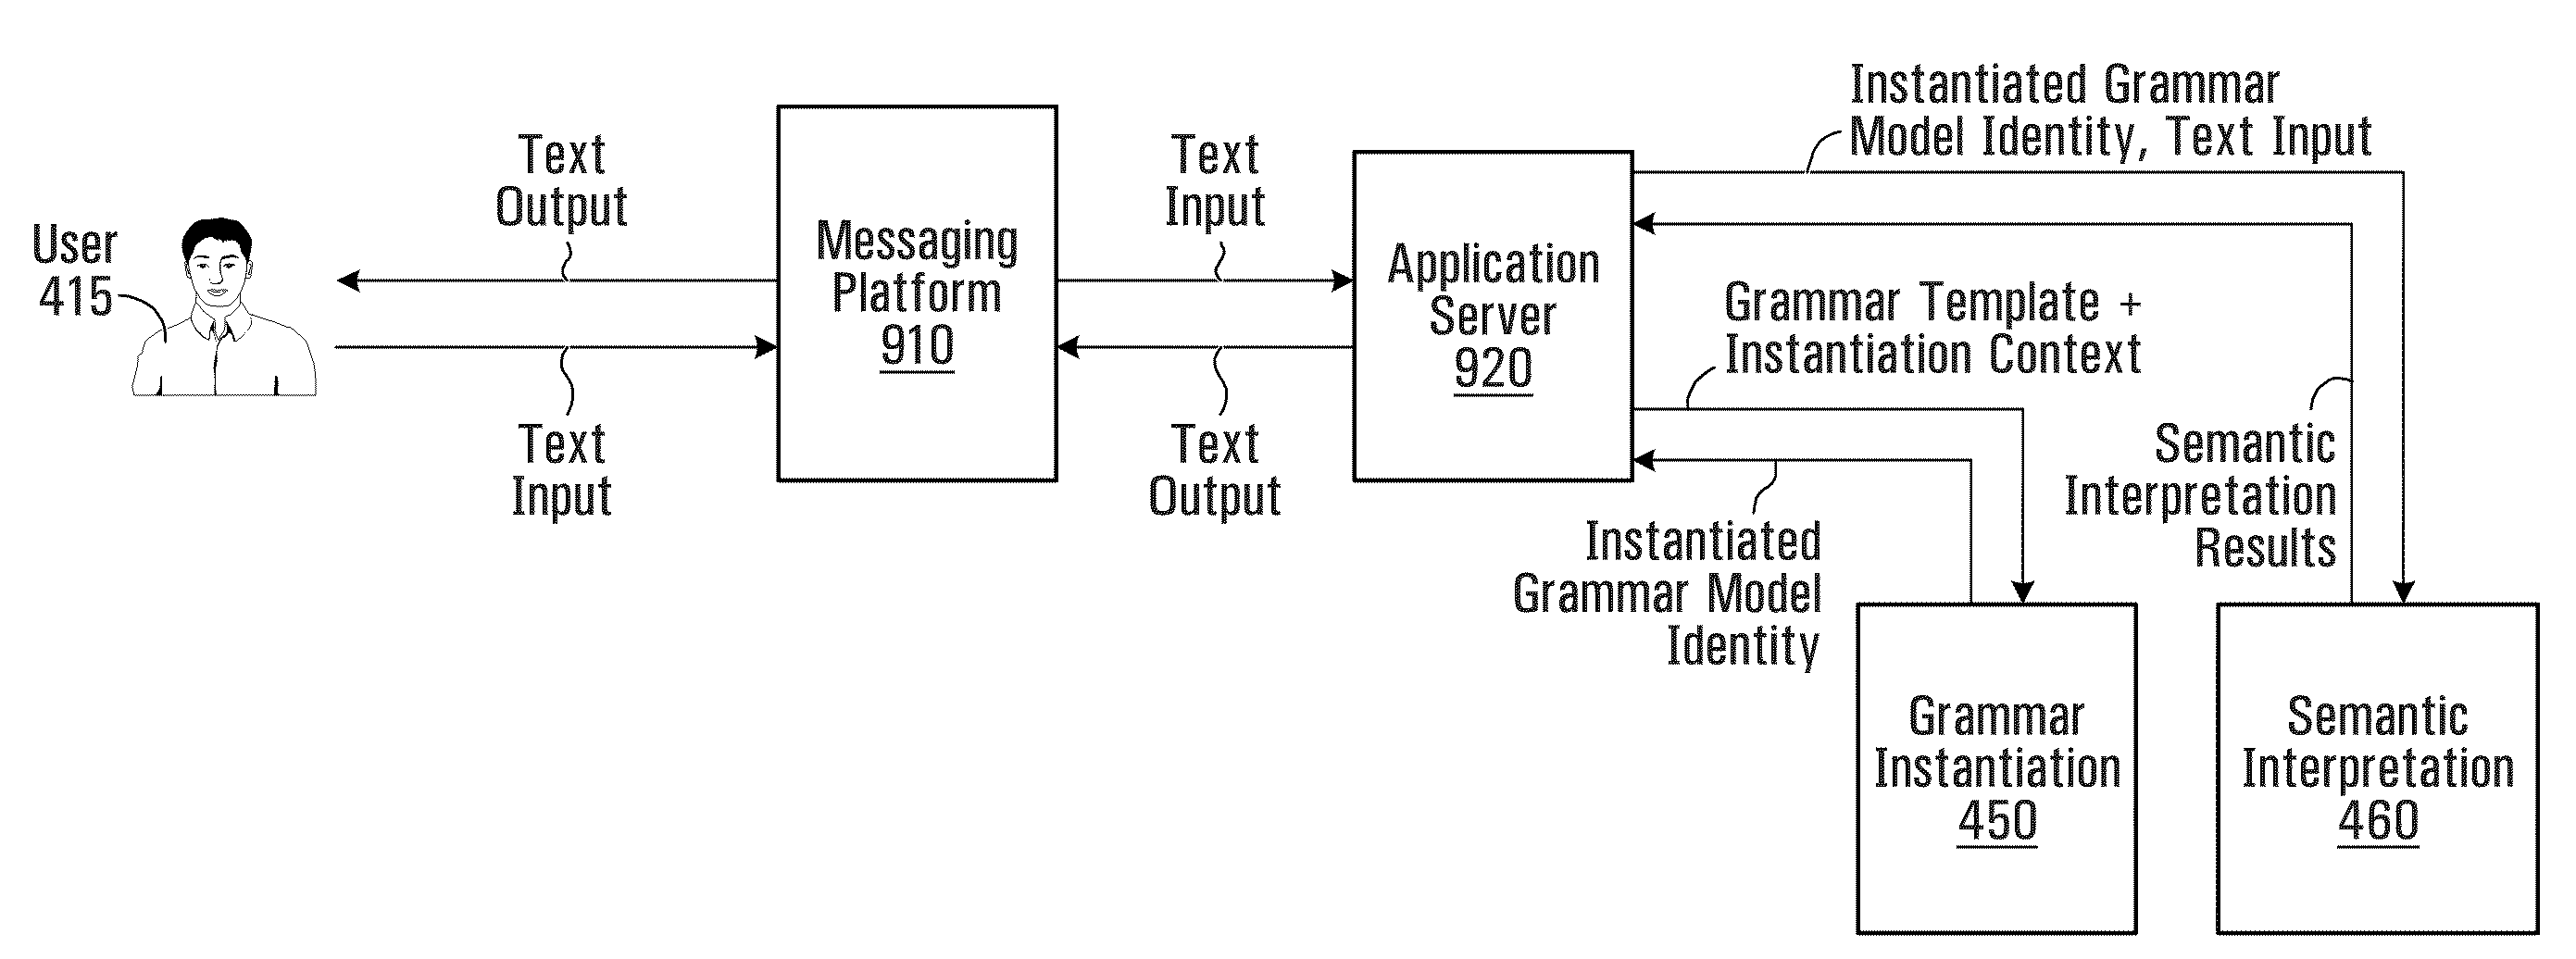 Methods and Systems for Providing Grammar Services